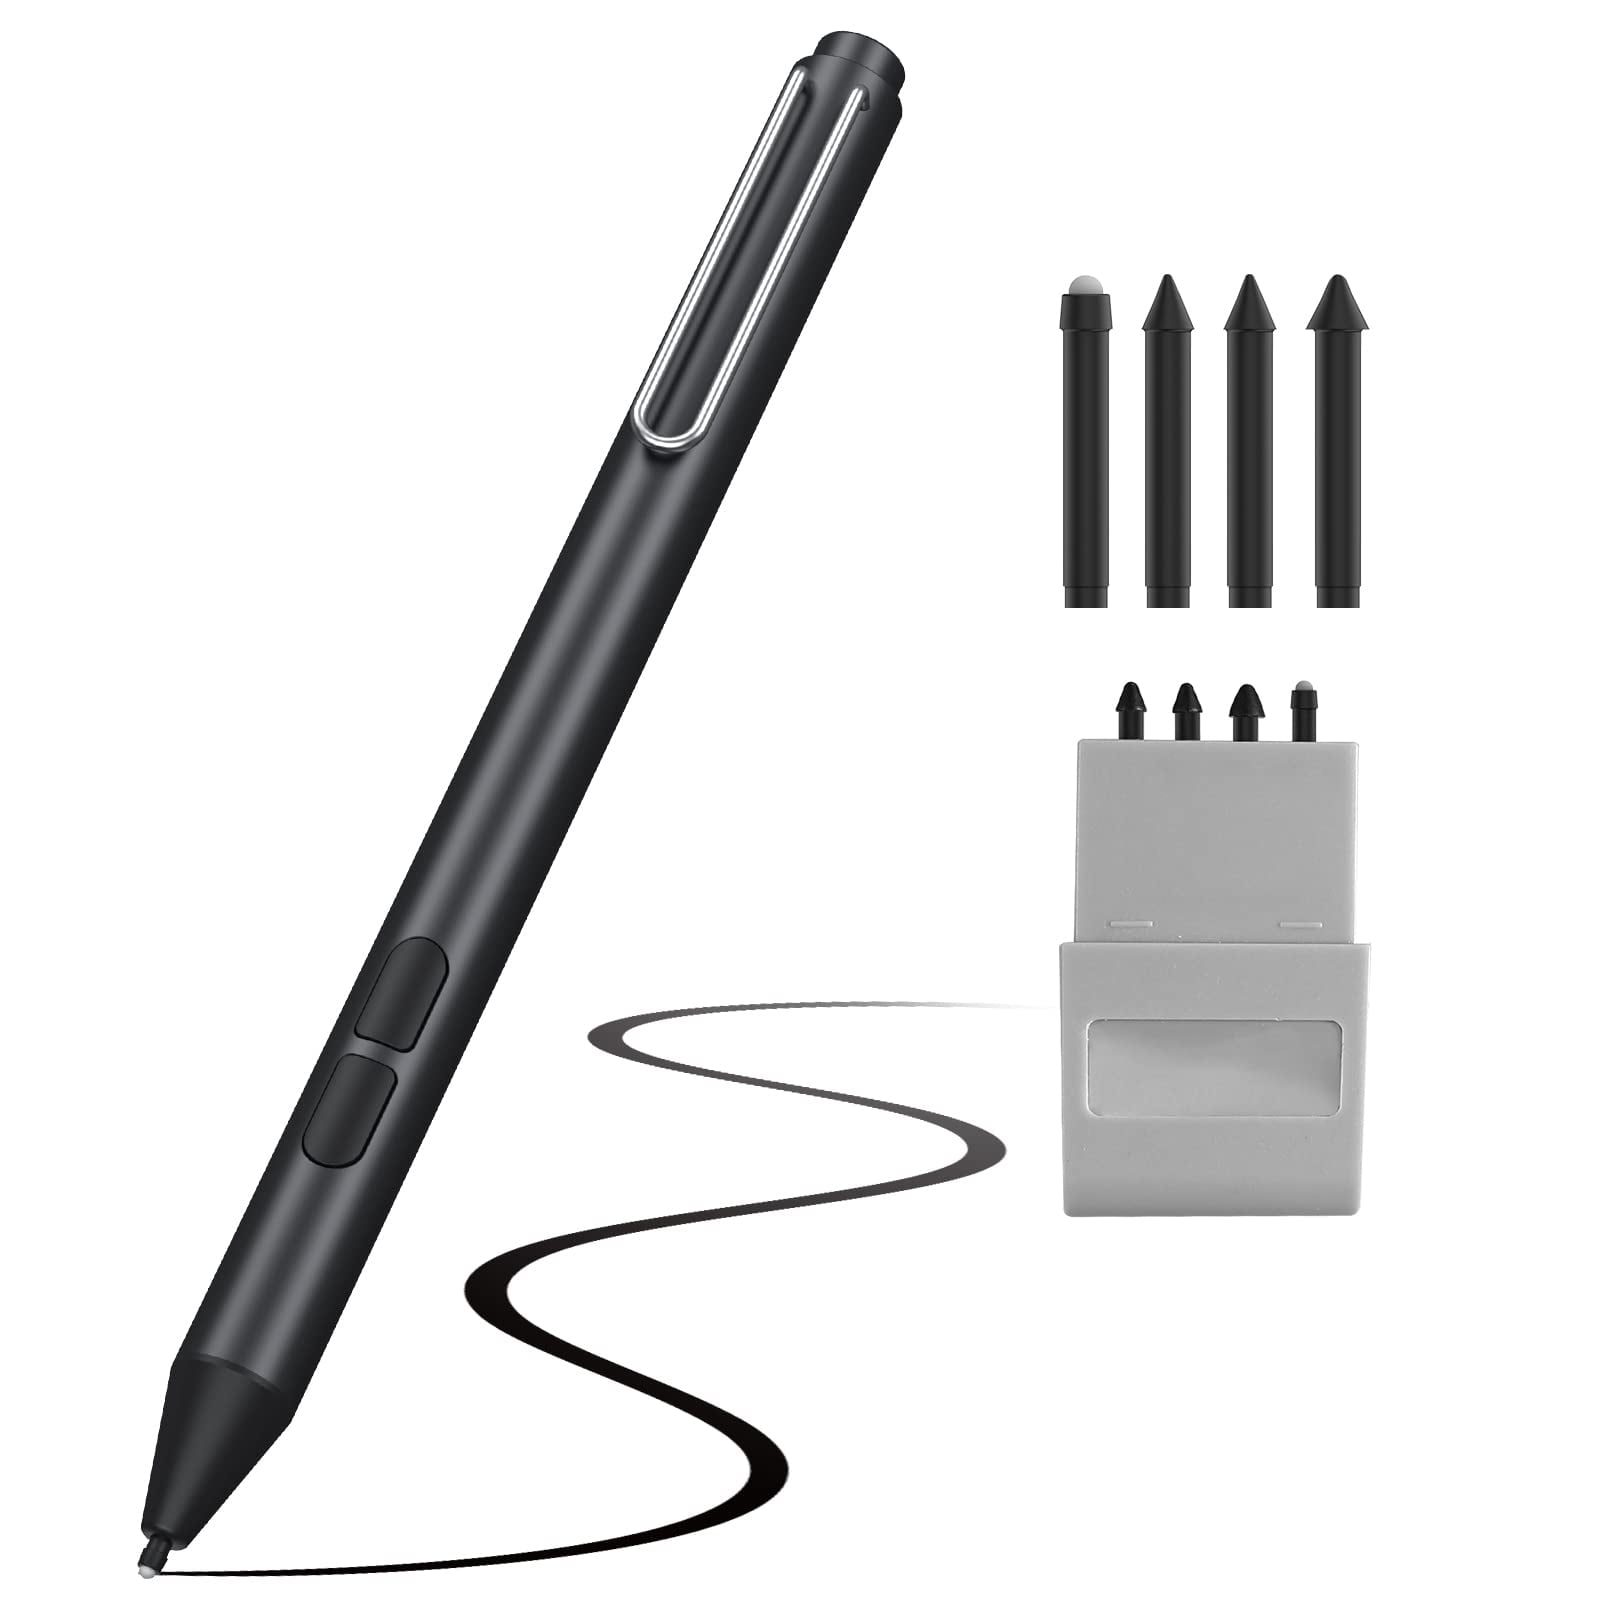 Microsoft Surface (Silver - Book, 3, (Non-Retail 4, Pro for Surface Pro Packaging) Pen 3XY-00001) Surface